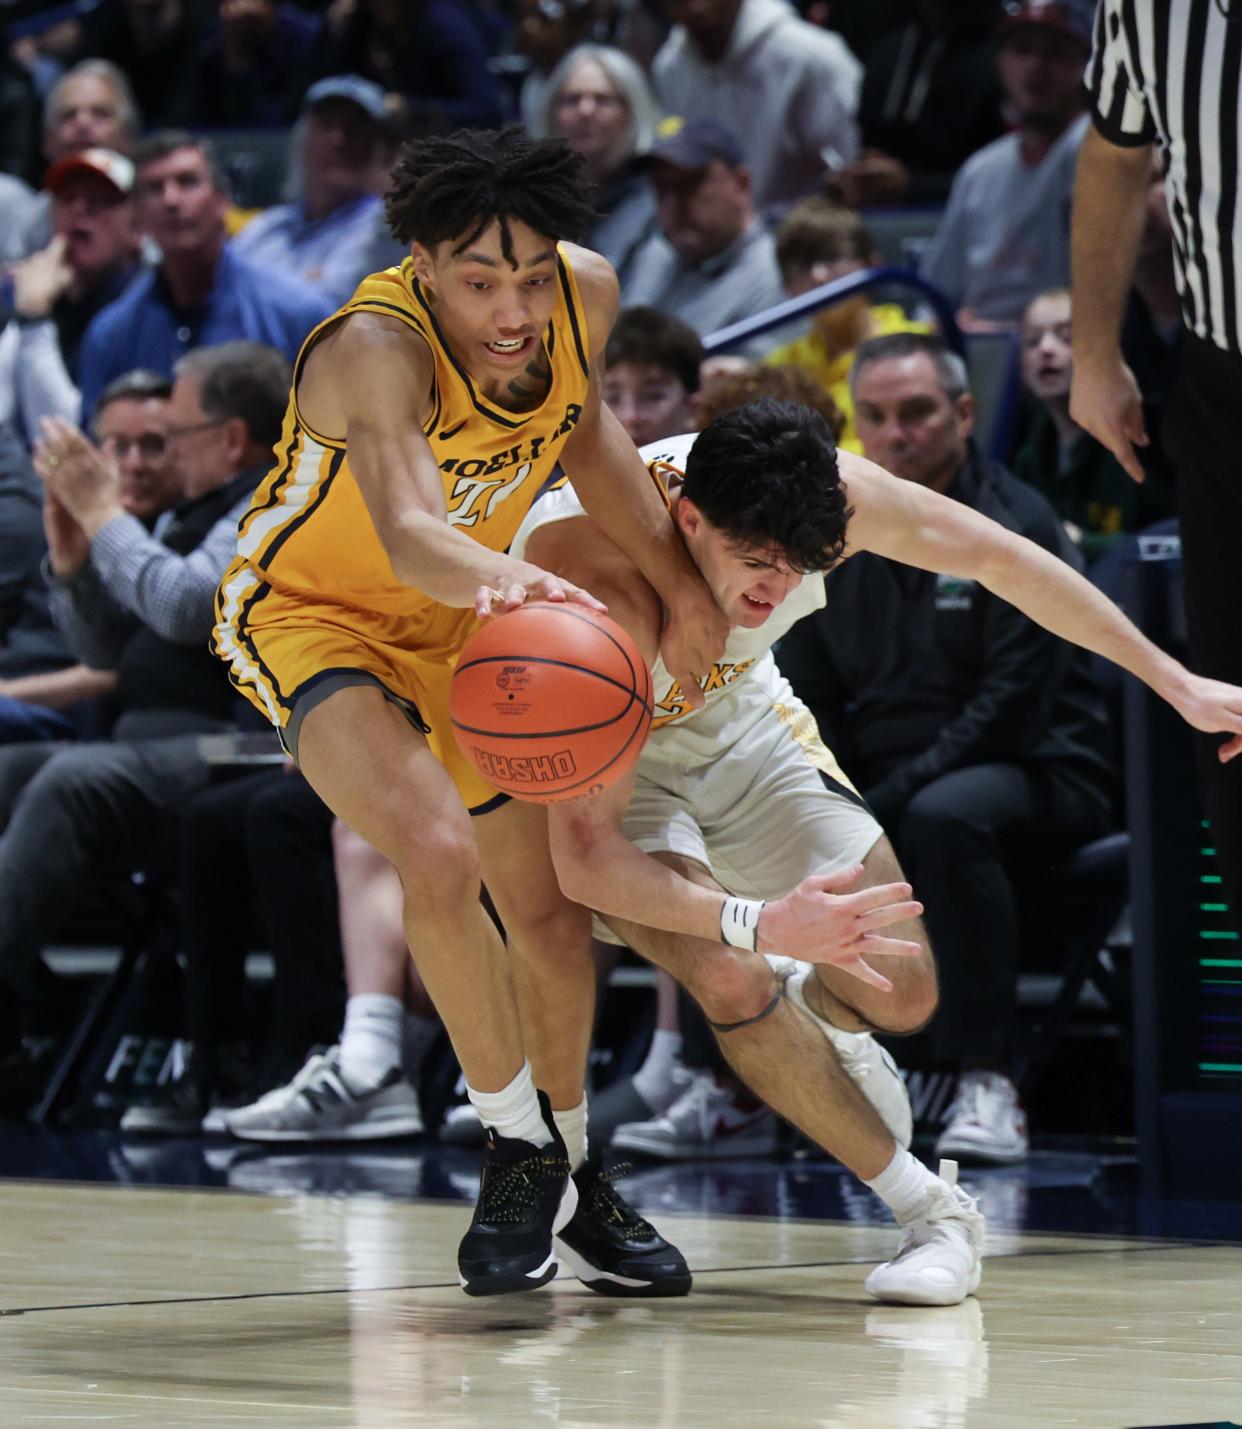 Alex Kazanecki of Moeller is The Enquirer's boys basketball co-player of the year in Division I.